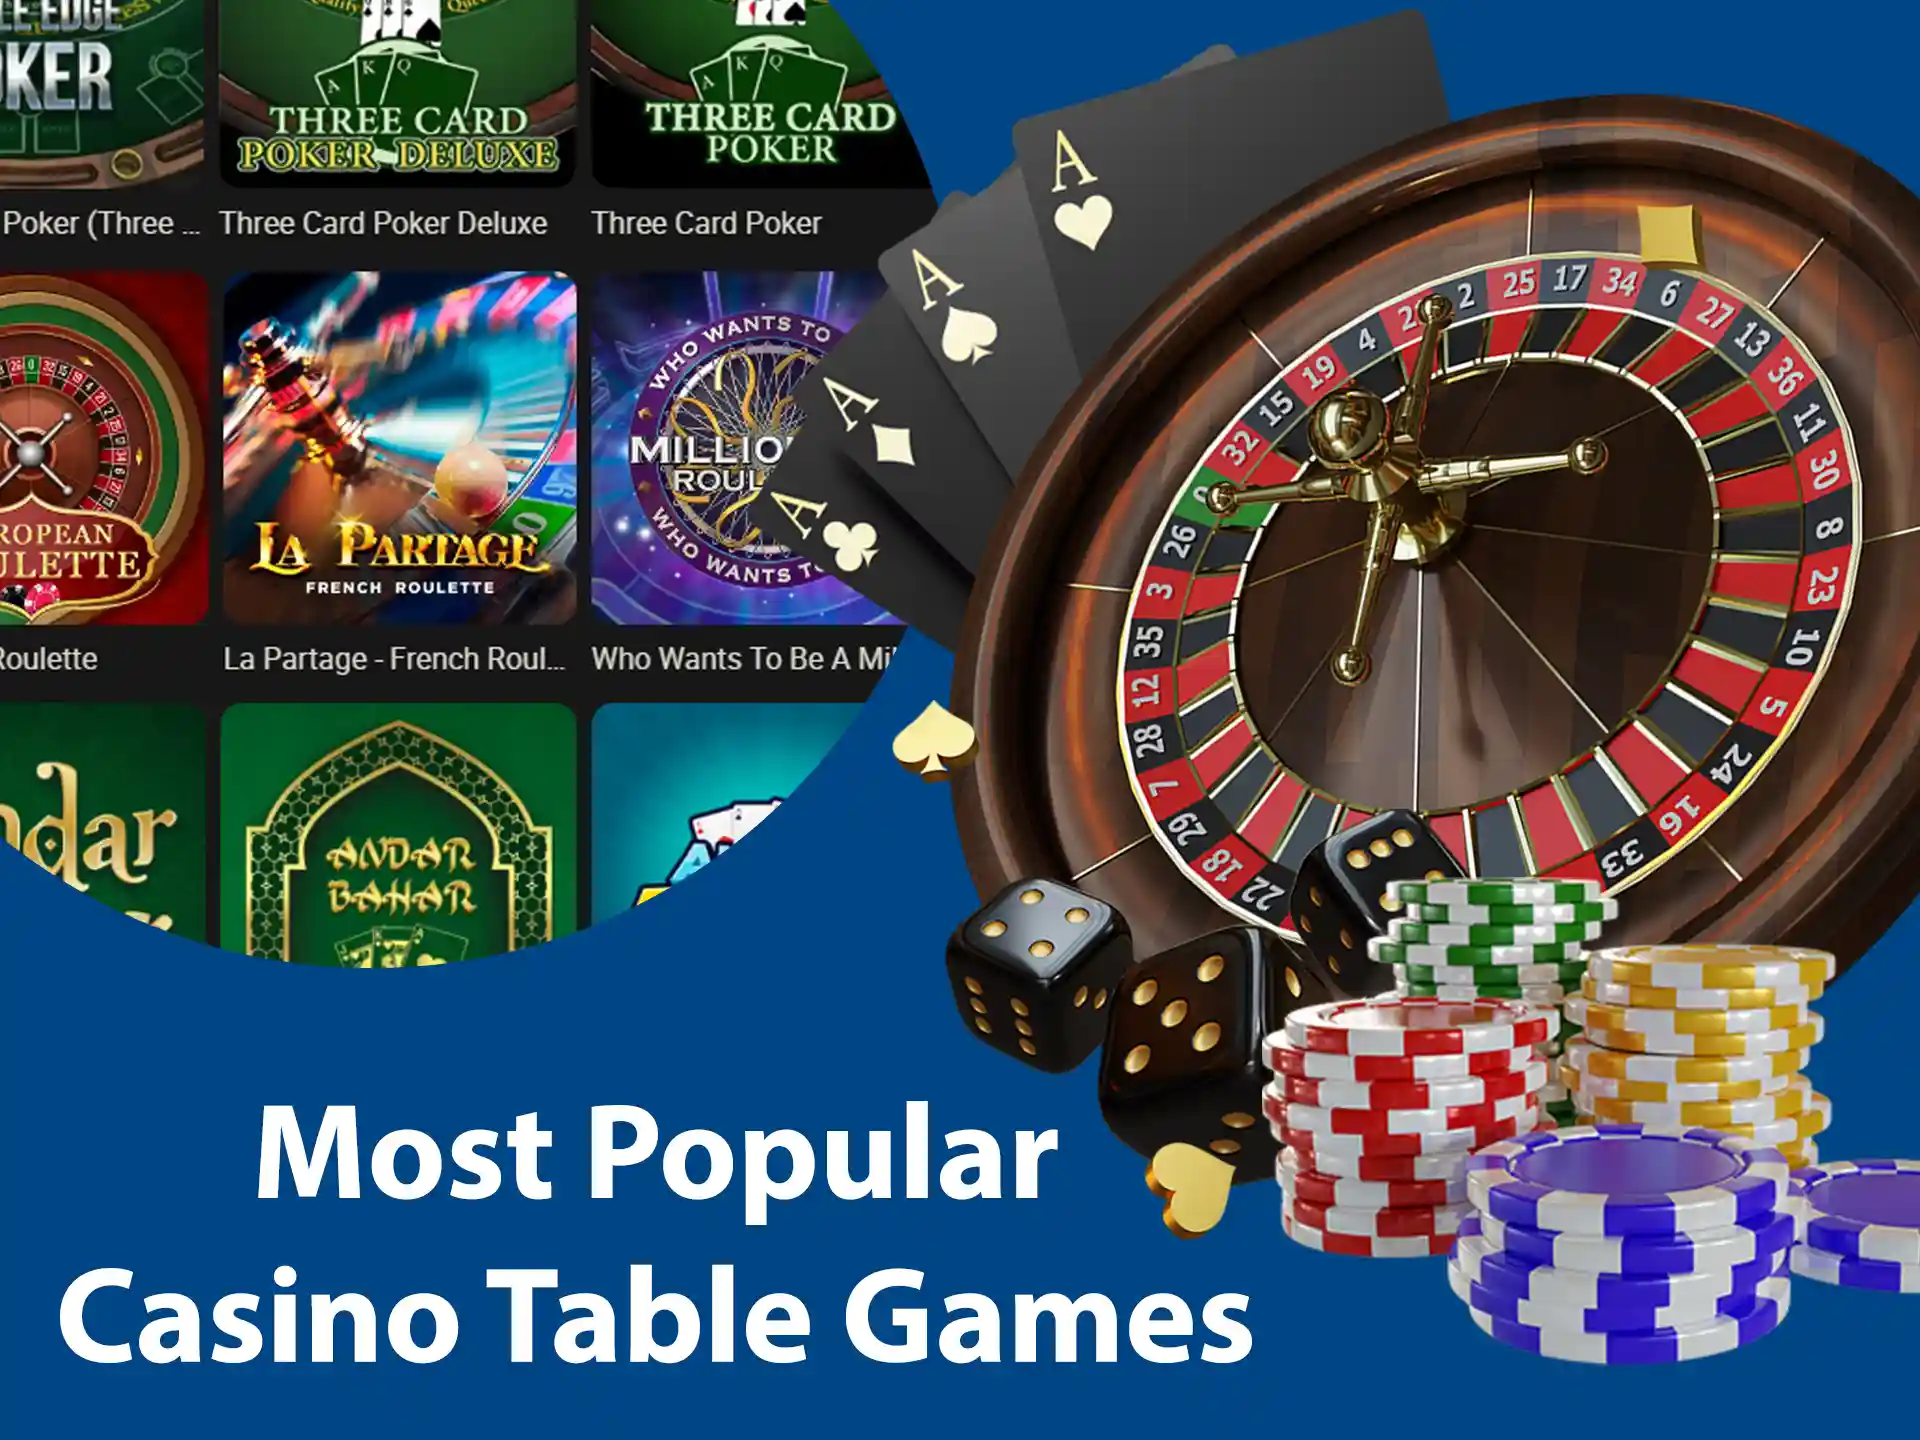 Fascinating table games according to experienced players.